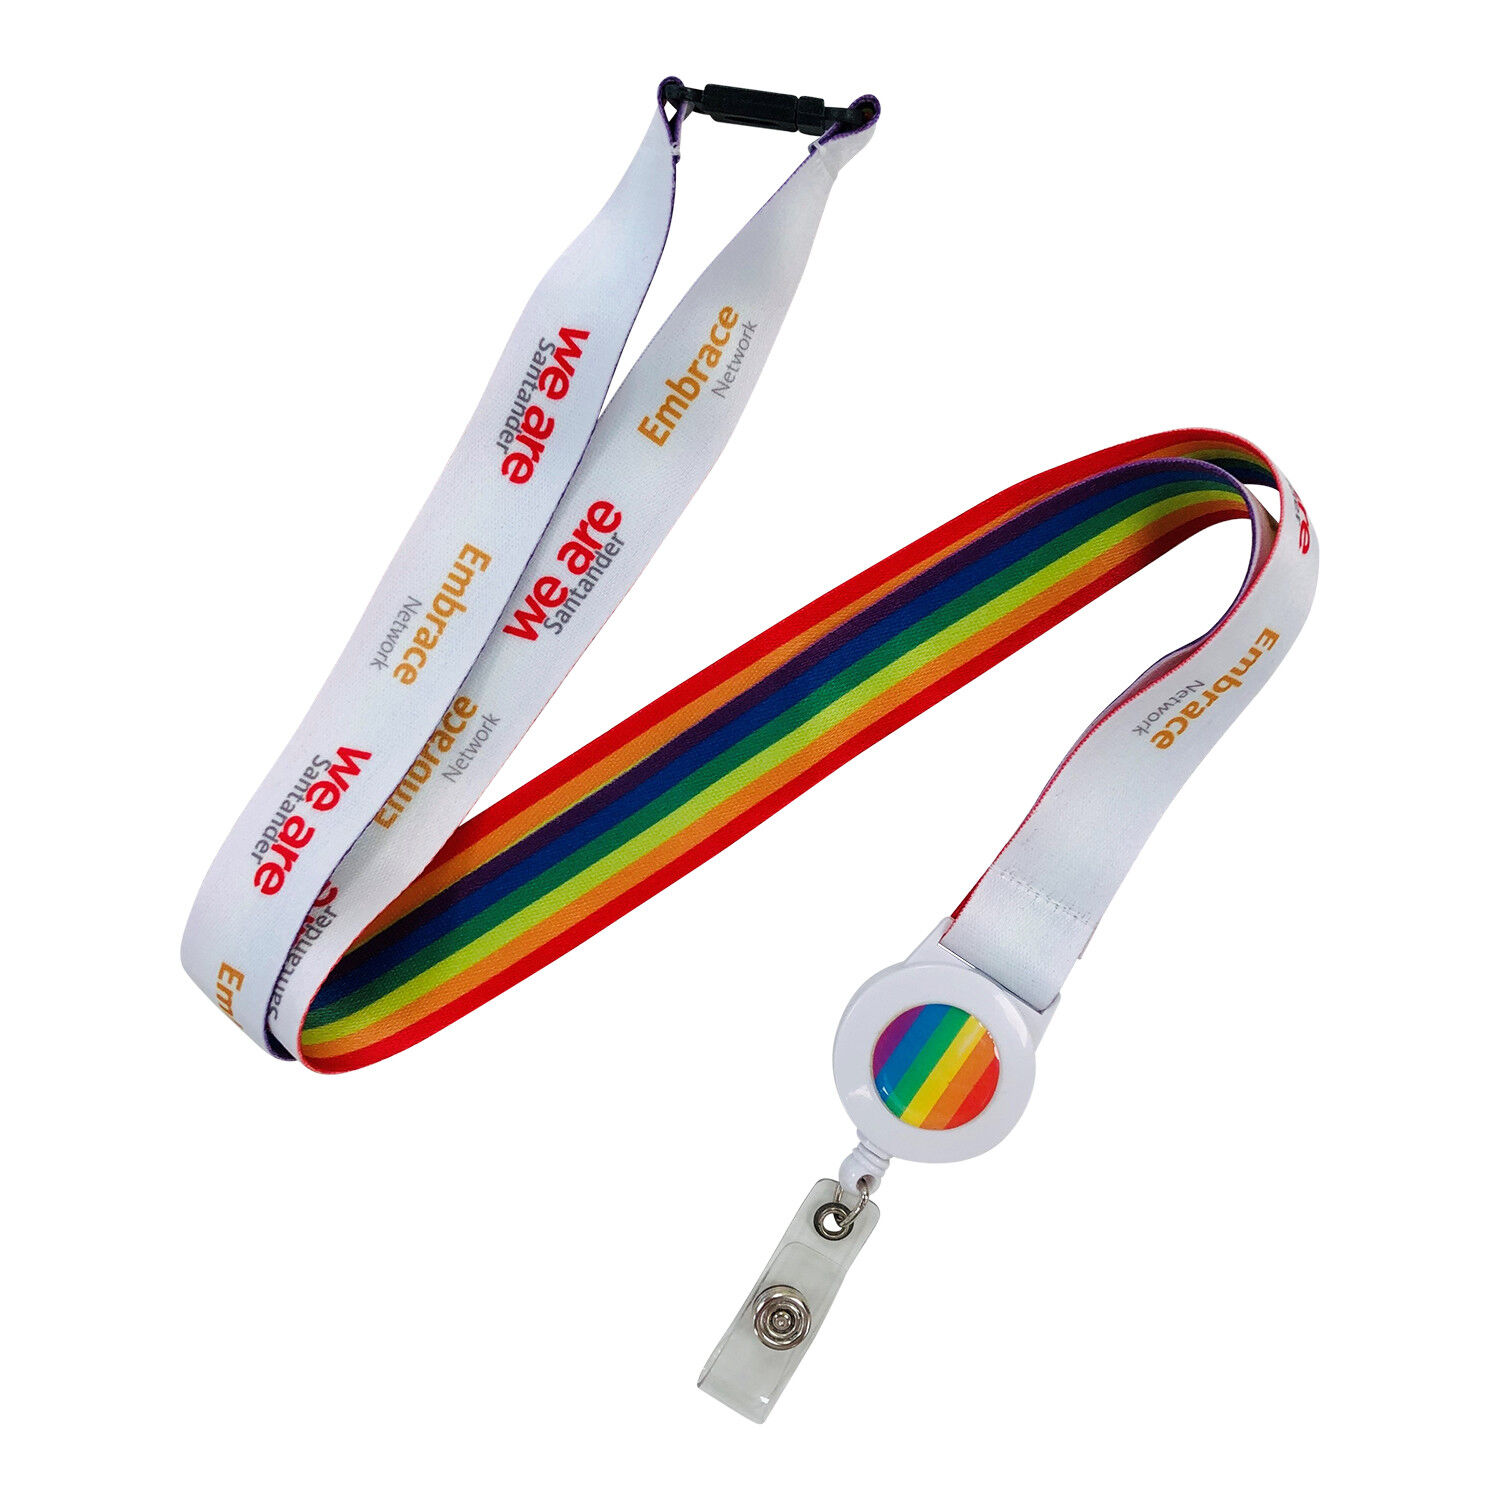 Dye Sublimated Lanyards with Pull Reel